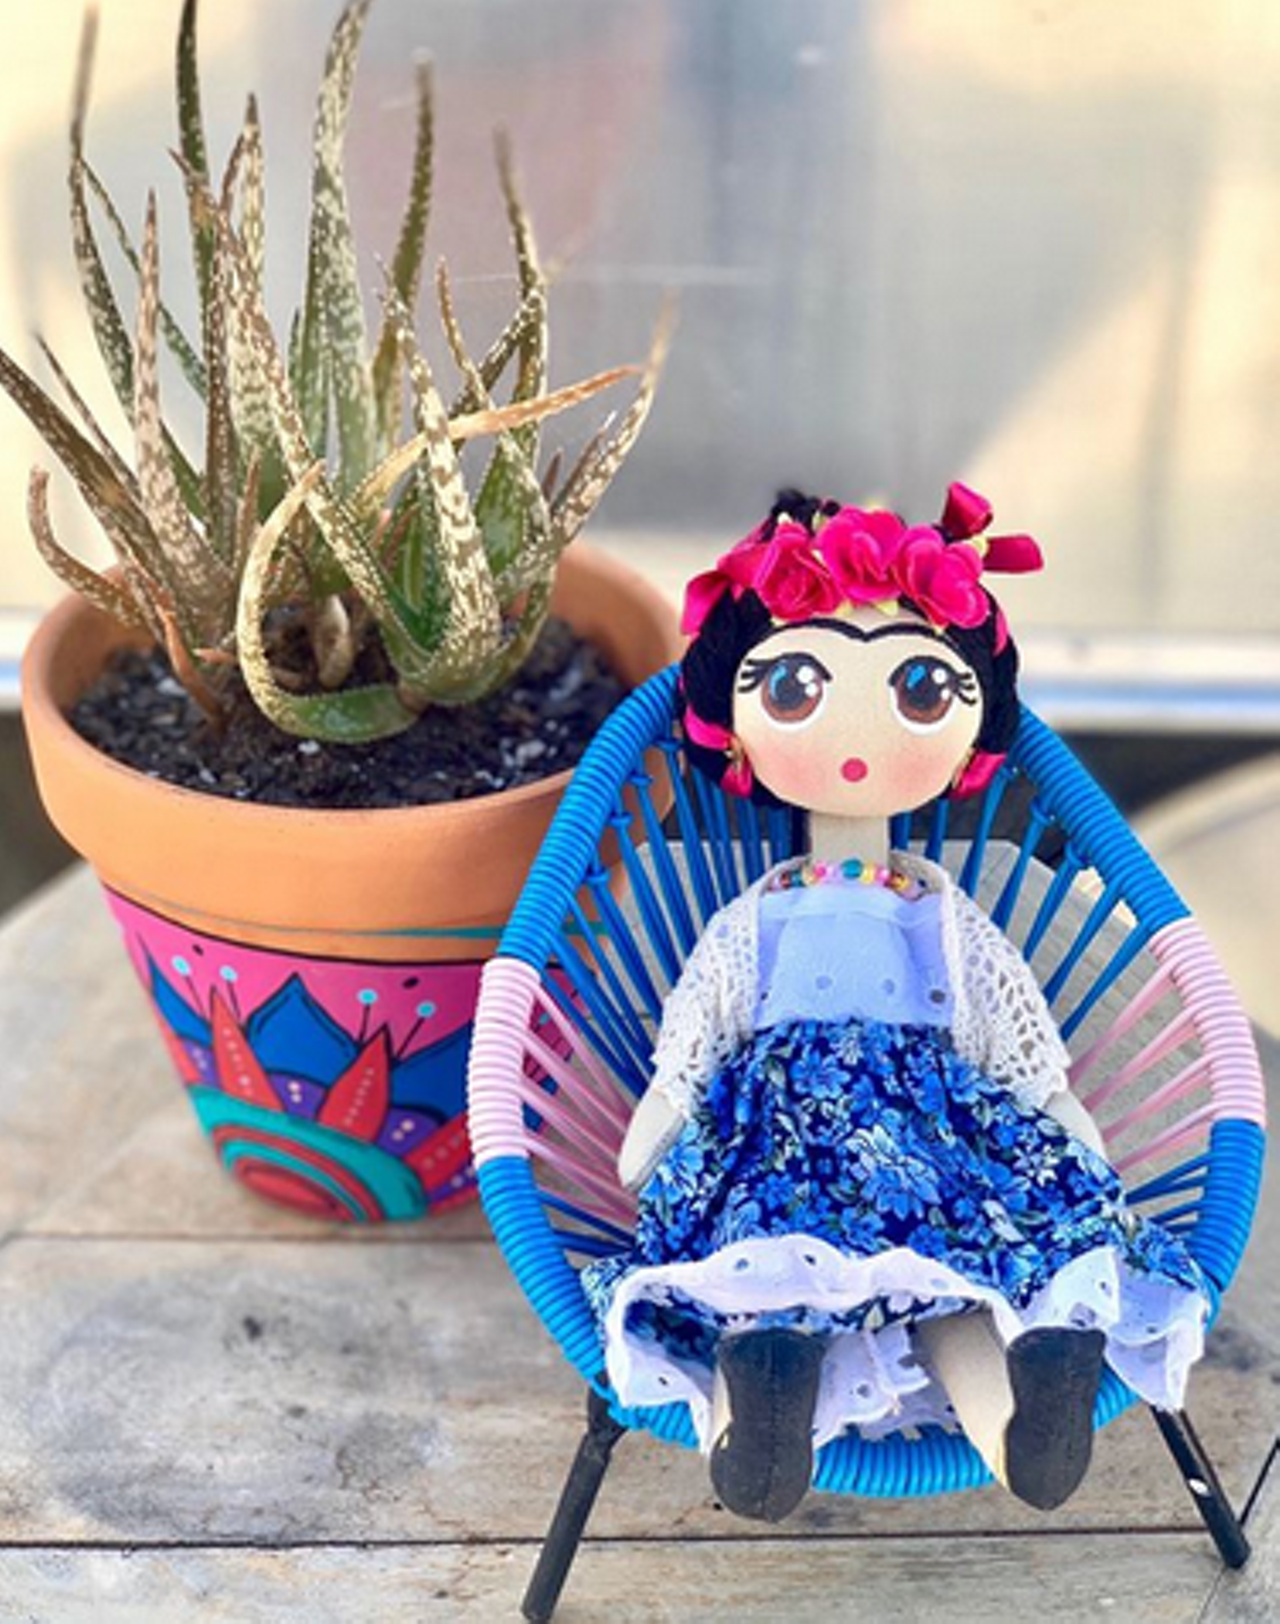 La Casa Frida
La Casa Frida gathers artisan goods from all over Mexico, so you better believe they’ll get them to your door. Online orders of $20 or more get free shipping using the code pincherona. 
Photo via Instagram / lacasafrida